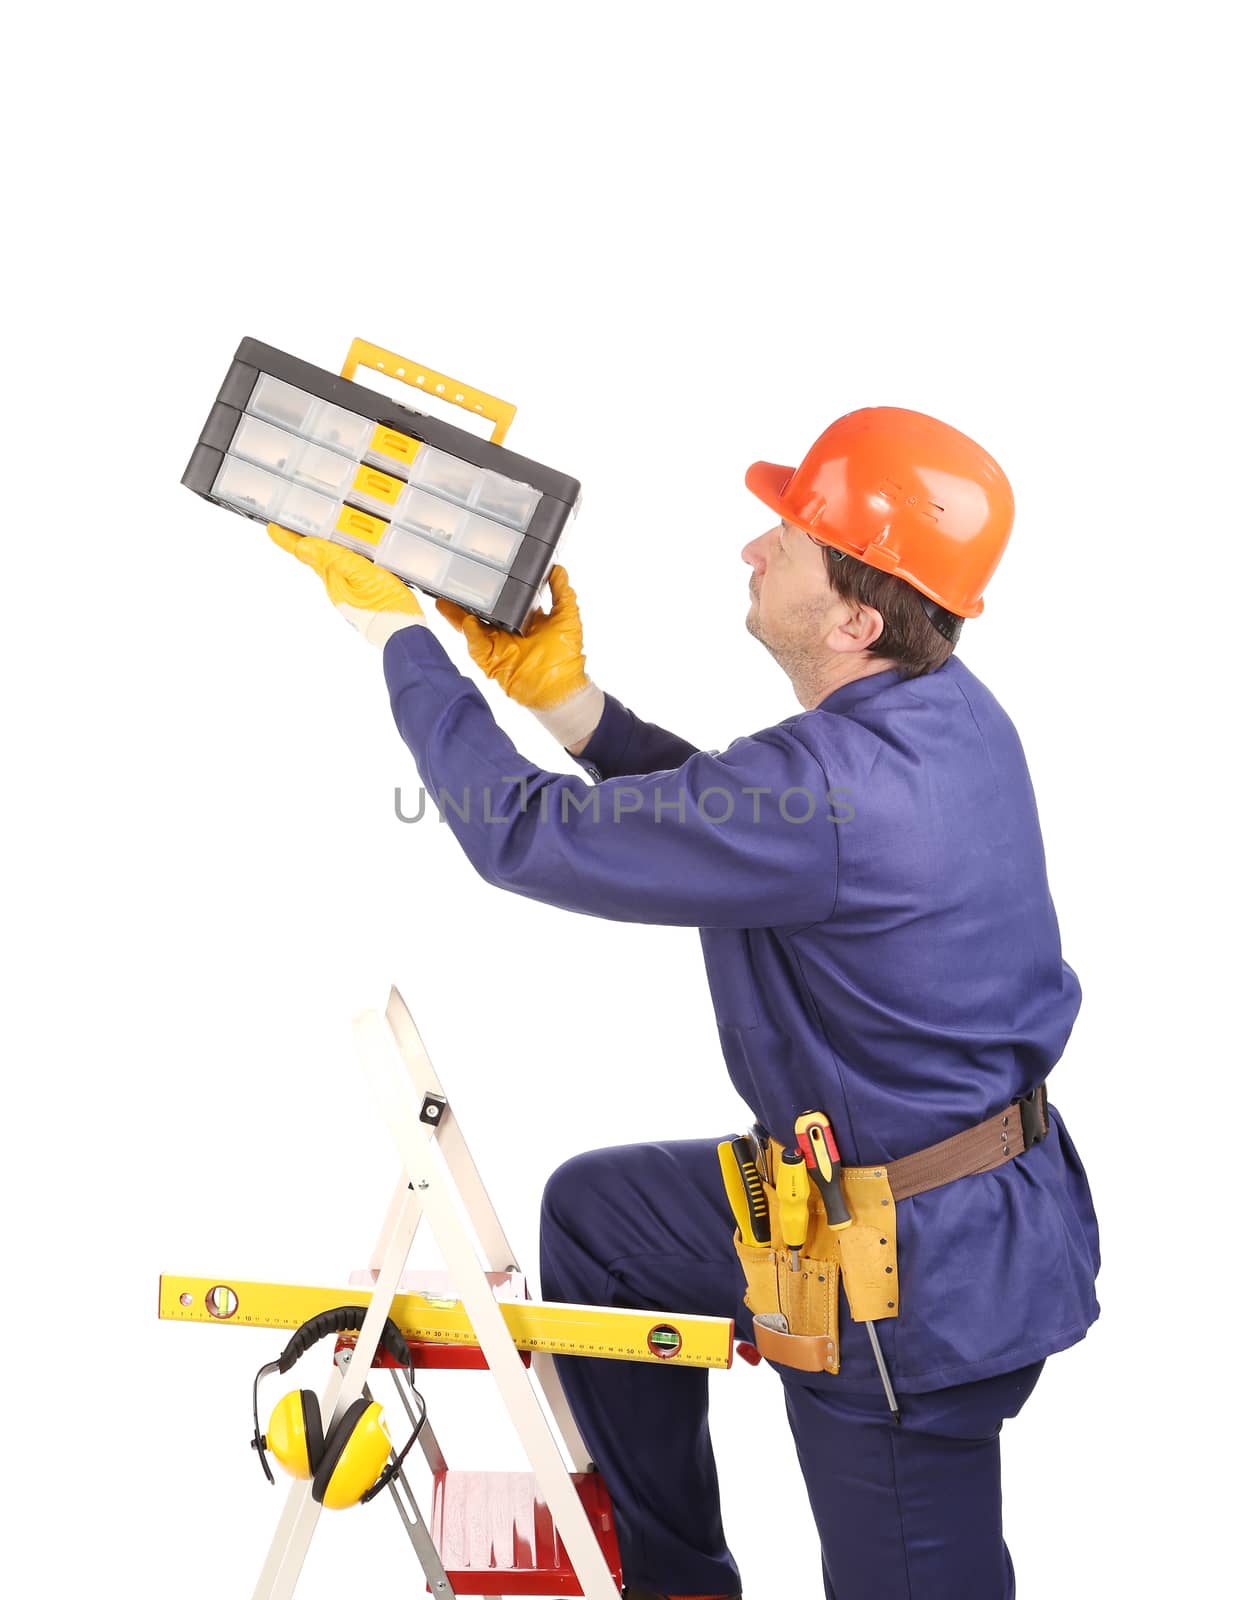 Worker in protective helmet on ladder with toolbox. Isolated on a white background.